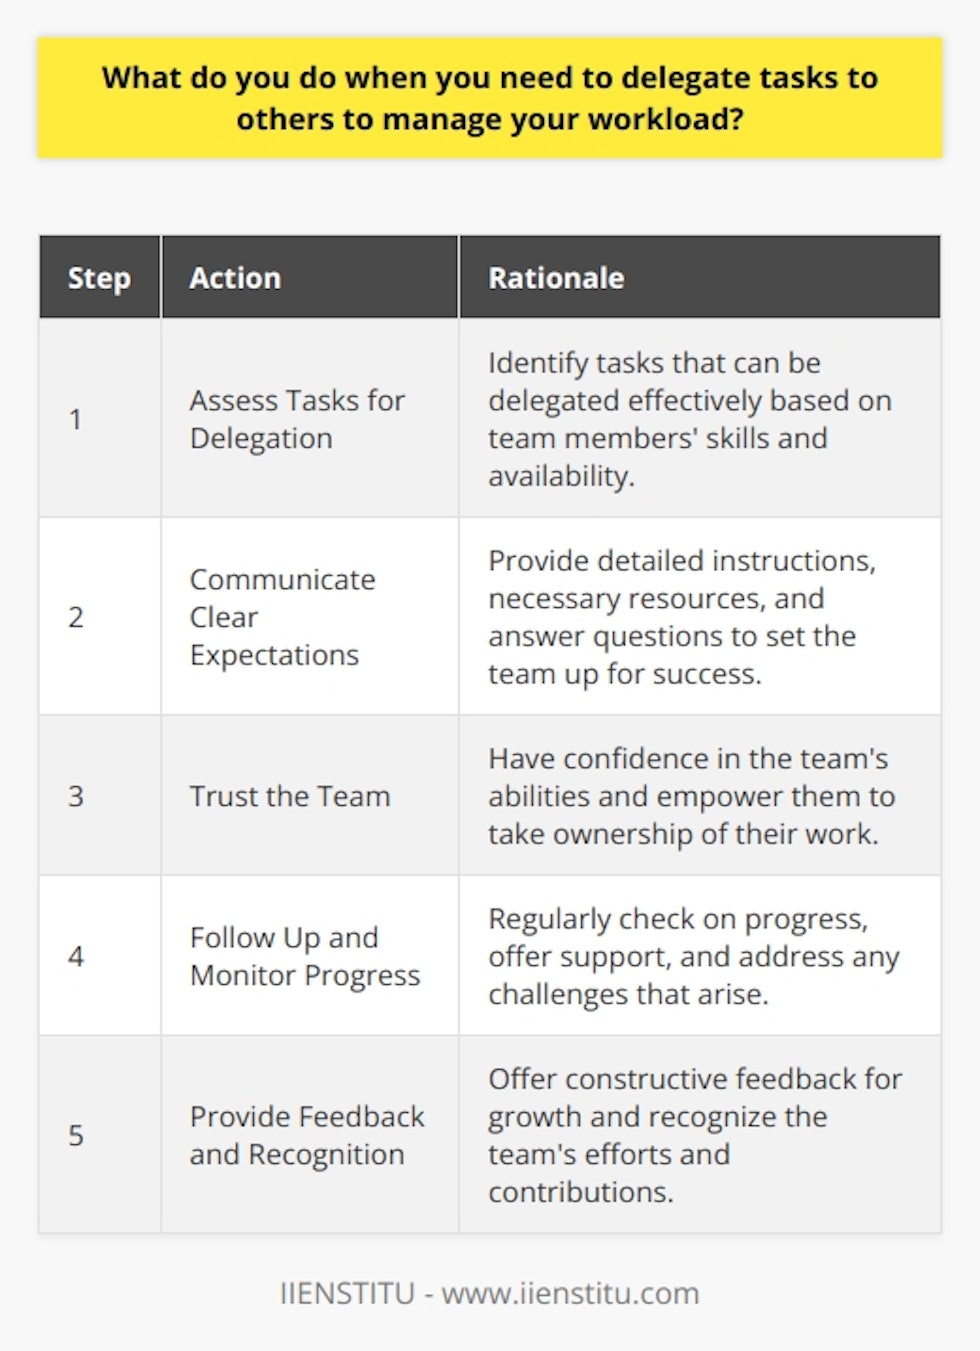 When my workload becomes overwhelming, I take a step back and assess which tasks can be delegated effectively. I consider the skills and availability of my team members to determine who is best suited for each task. Communicating Clear Expectations I ensure that I communicate my expectations clearly when delegating tasks. I provide detailed instructions and any necessary resources to set my team up for success. I also make myself available to answer questions and provide guidance throughout the process. Trusting My Team One of the most important aspects of successful delegation is trust. I have confidence in my teams abilities and trust them to complete the tasks I assign. This empowers them to take ownership of their work and allows me to focus on higher-level responsibilities. Following Up and Providing Feedback After delegating tasks, I make sure to follow up regularly to monitor progress and offer support when needed. Once the tasks are completed, I provide constructive feedback to help my team members grow and improve. I also make sure to recognize and appreciate their efforts and contributions. By delegating tasks effectively, I can manage my workload more efficiently while also providing opportunities for my team to develop their skills and take on more responsibility.